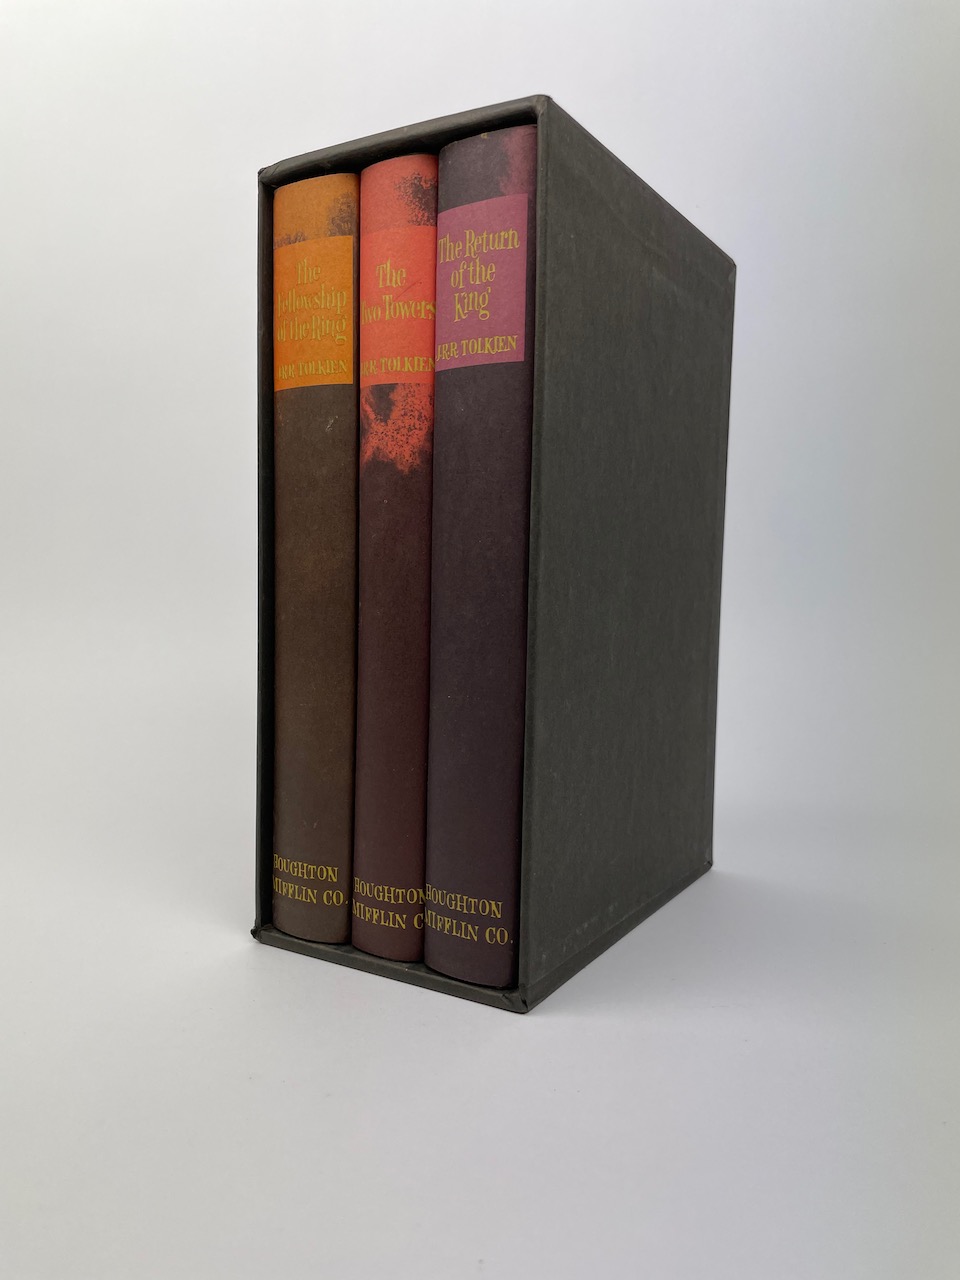 Lord of the Rings, 2nd US Edition in Original Publishers Slipcase and with Dustjackets